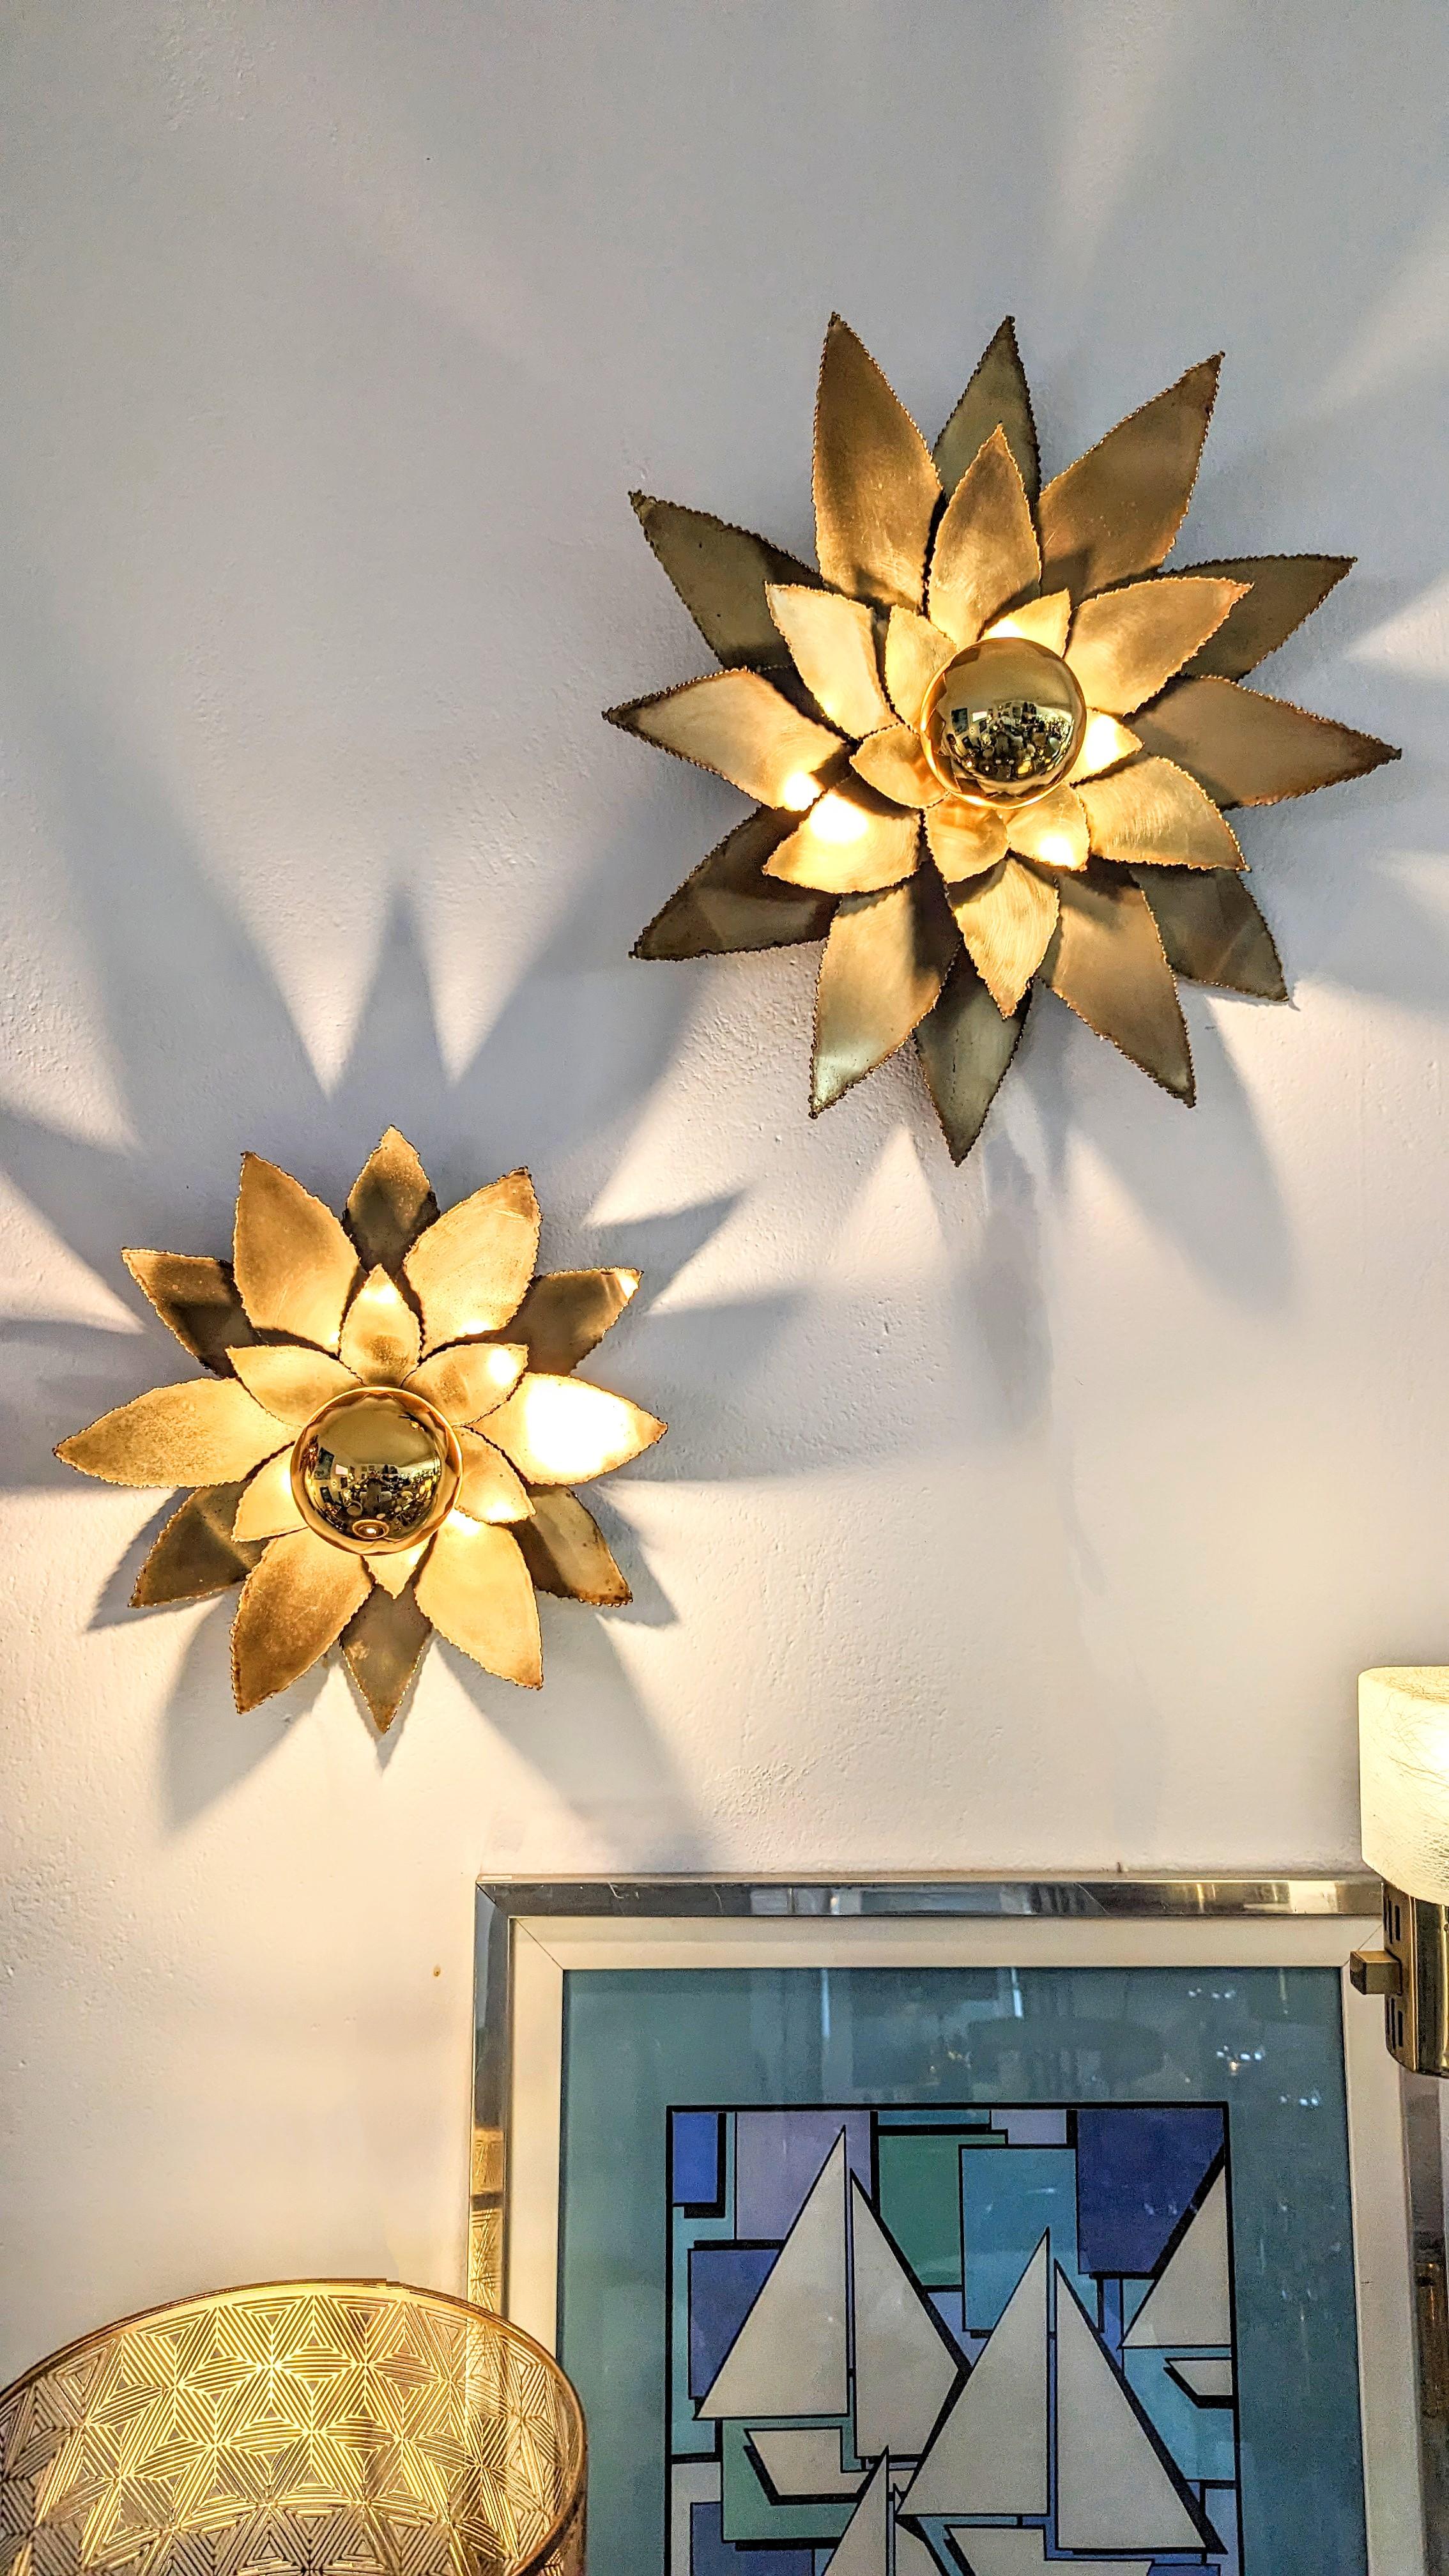 Beautiful and rare pair of Maison Jansen brass flower wall light manufactured in France in 1970s. This pair of beautiful flowers wall lights sconces are one of the most iconic pieces by French designer and manufacturer Maison Jansen. It’s made